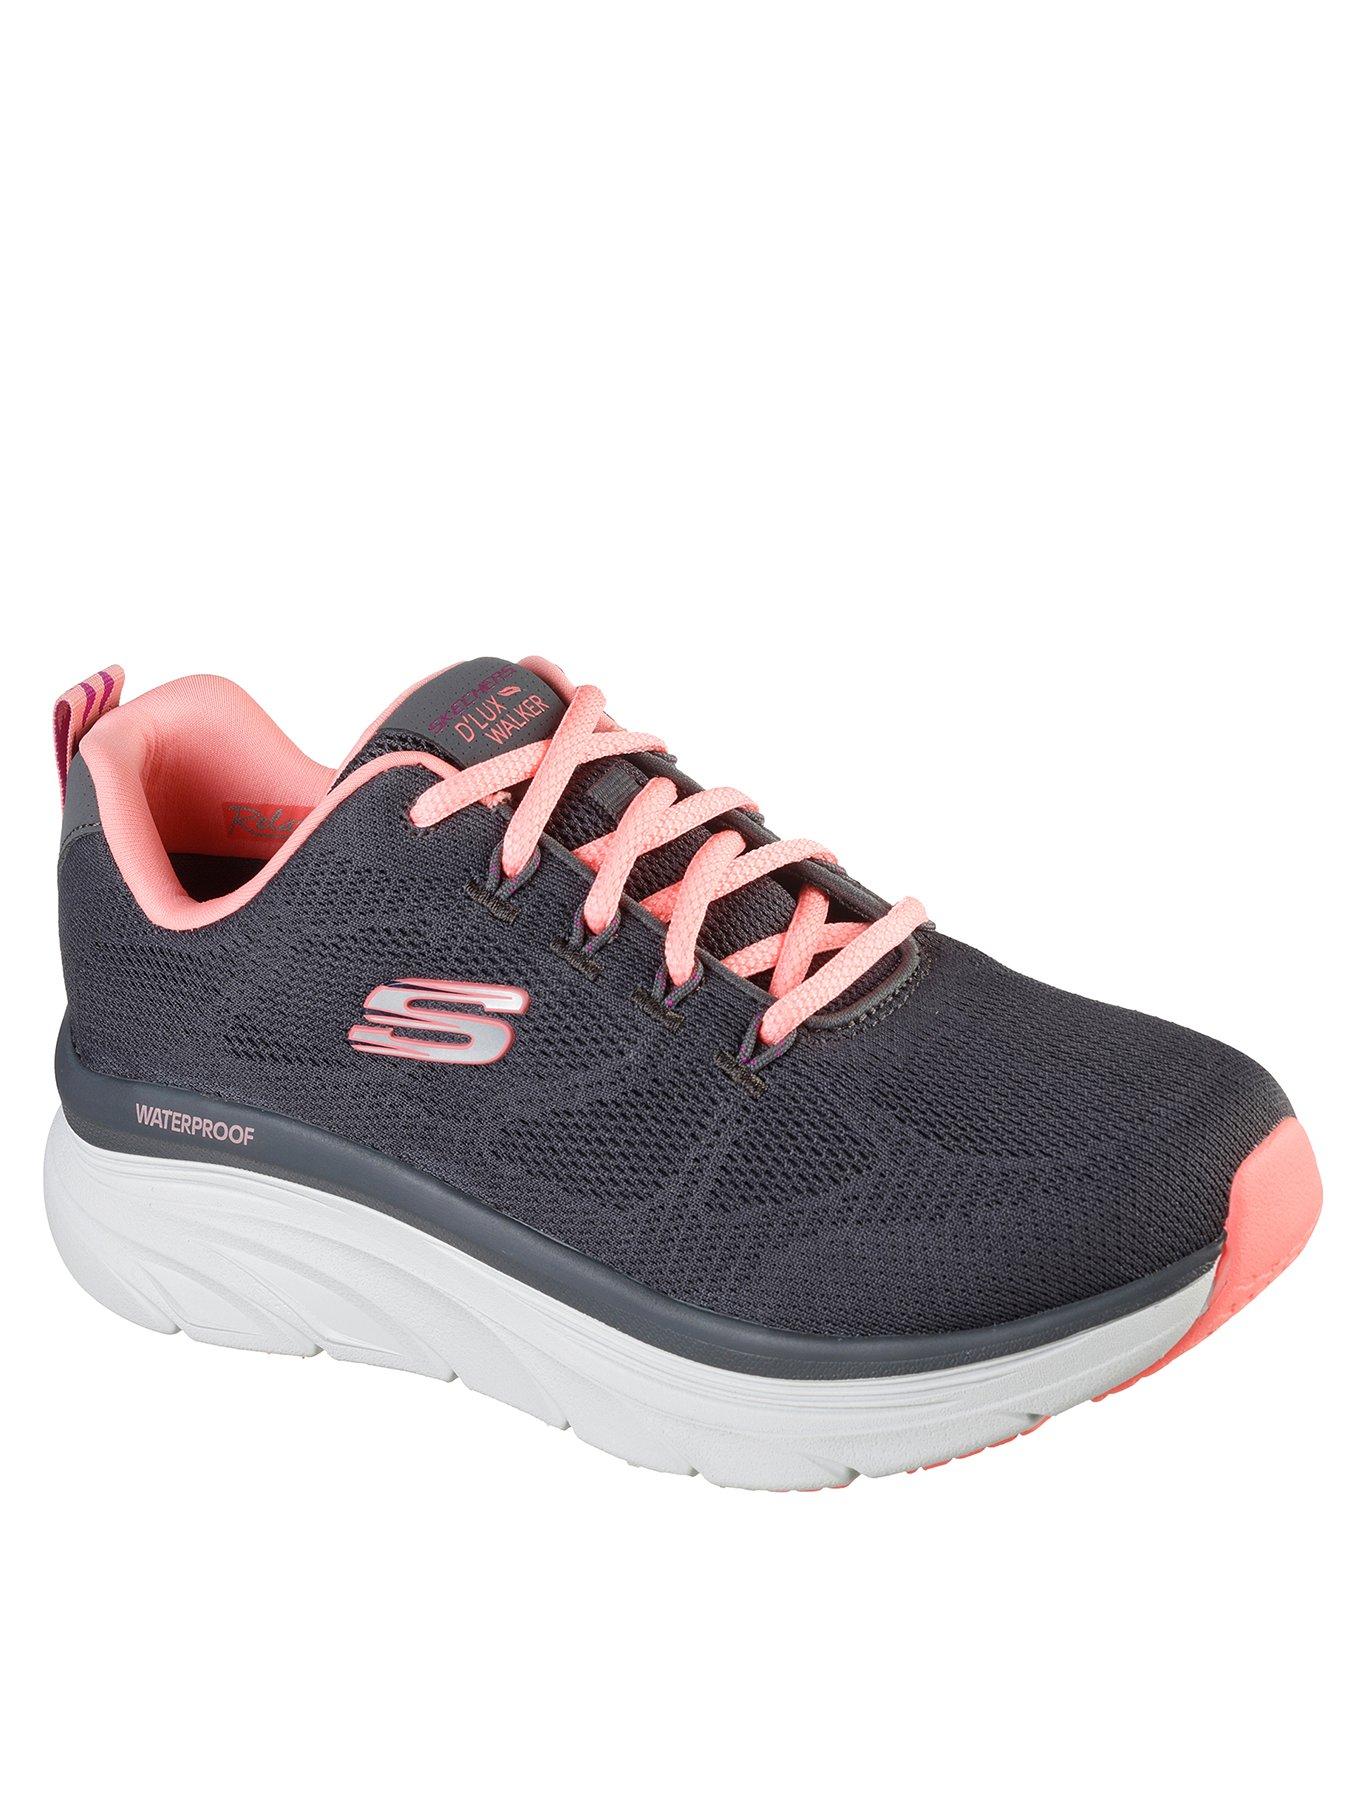 Skechers D'Lux Walker Mesh Lace Up Trainers - Charcoal